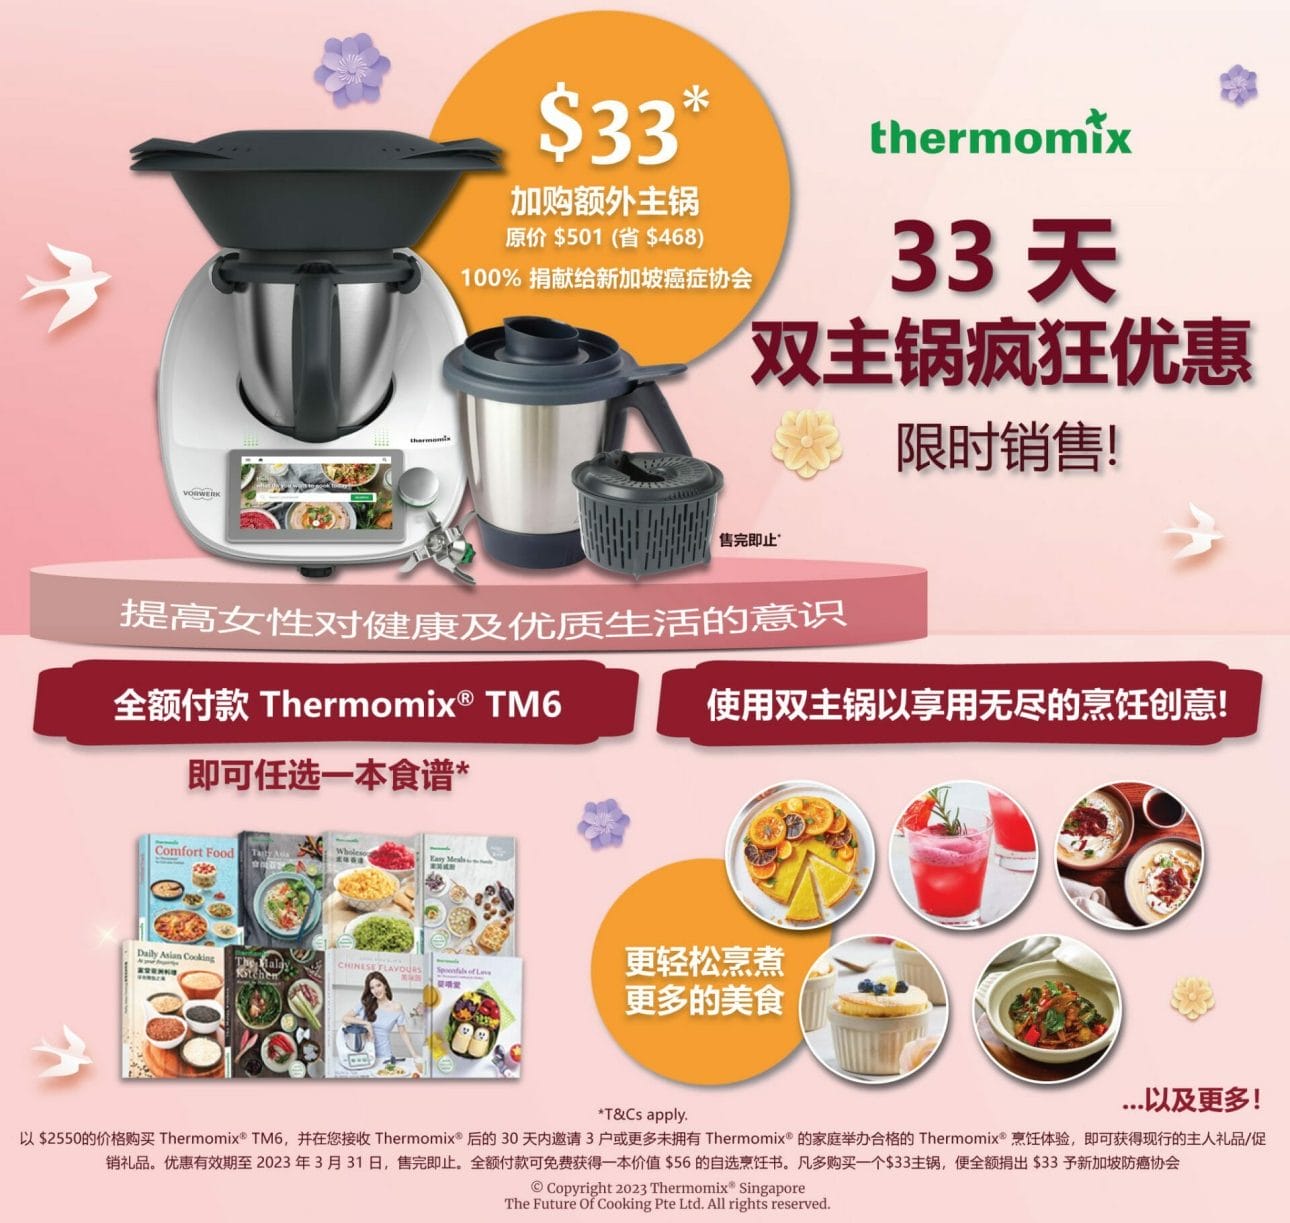 thermomix® tm6 with an extra mixing bowl